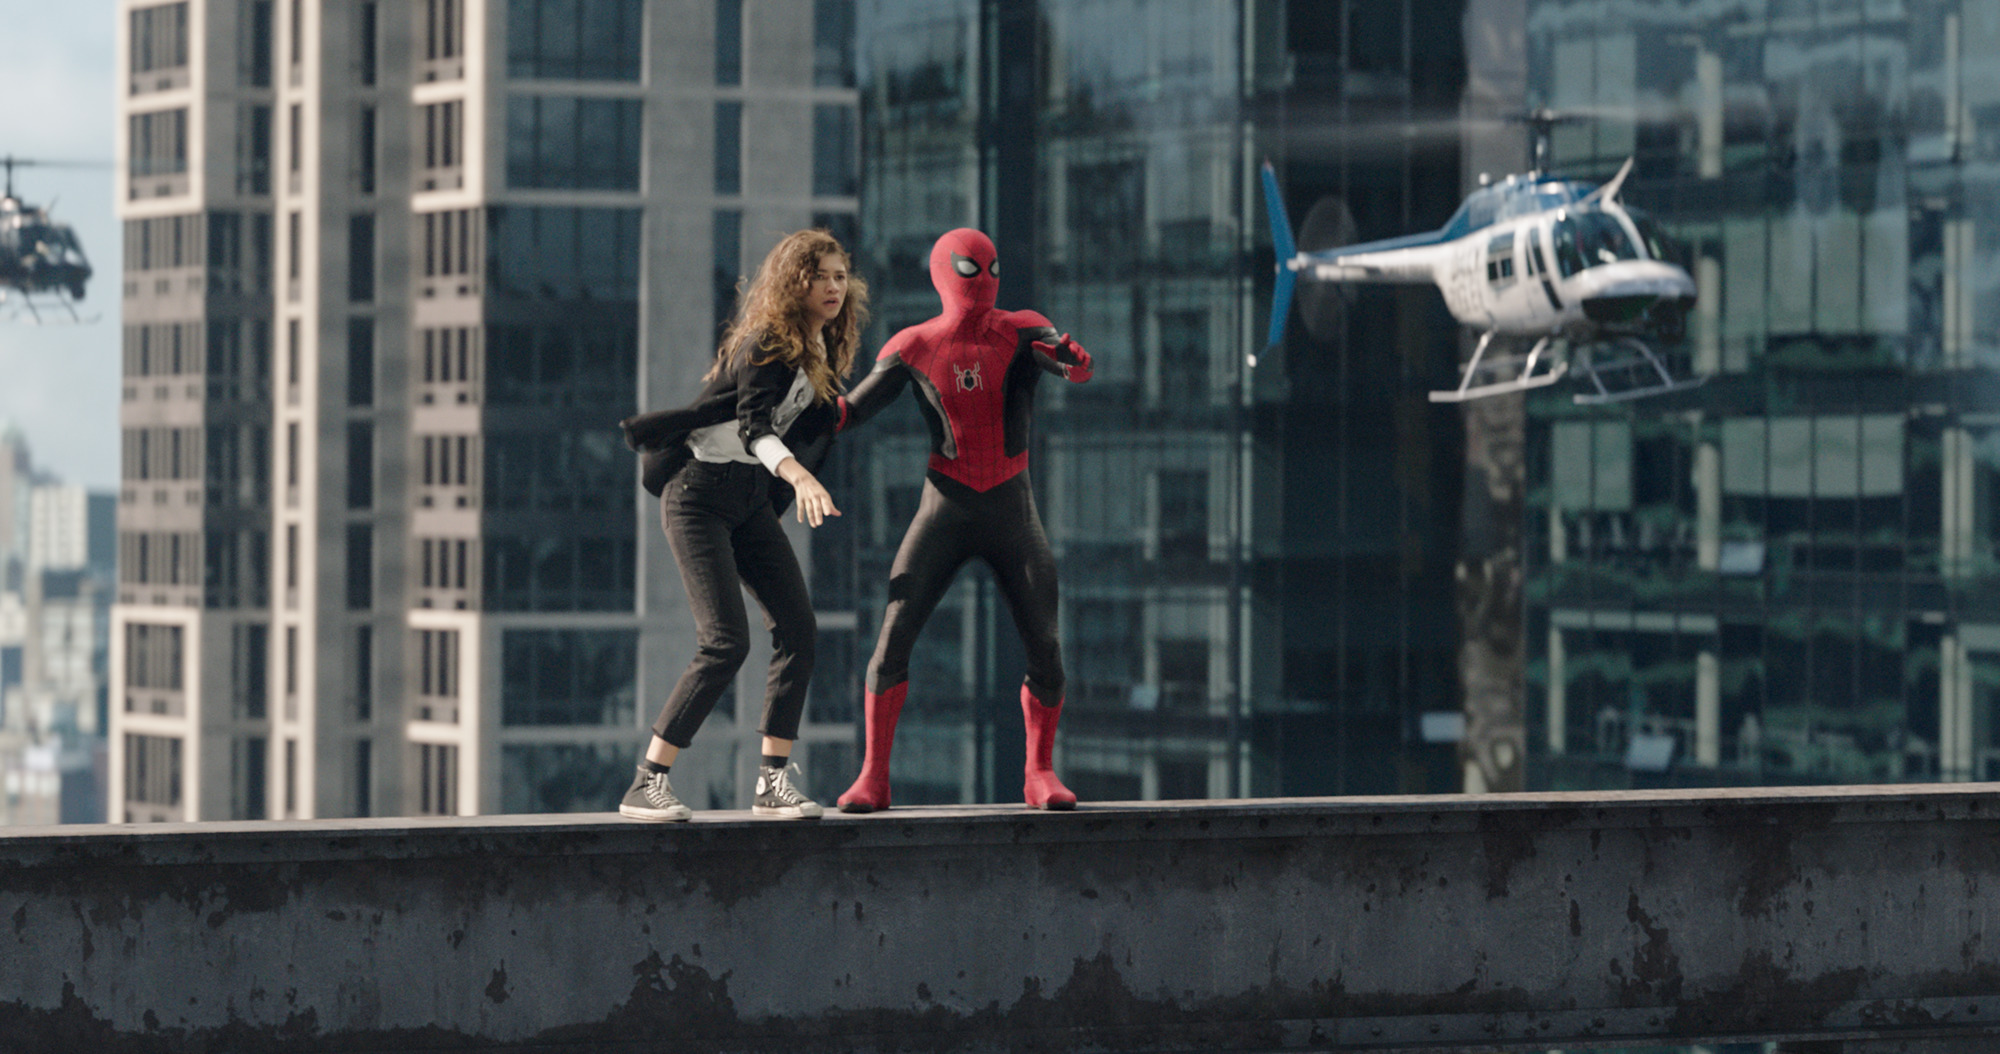 Spider-Man: No Way Home (4K Ultra HD + Blu-ray Sony Pictures) - image 4 of 5